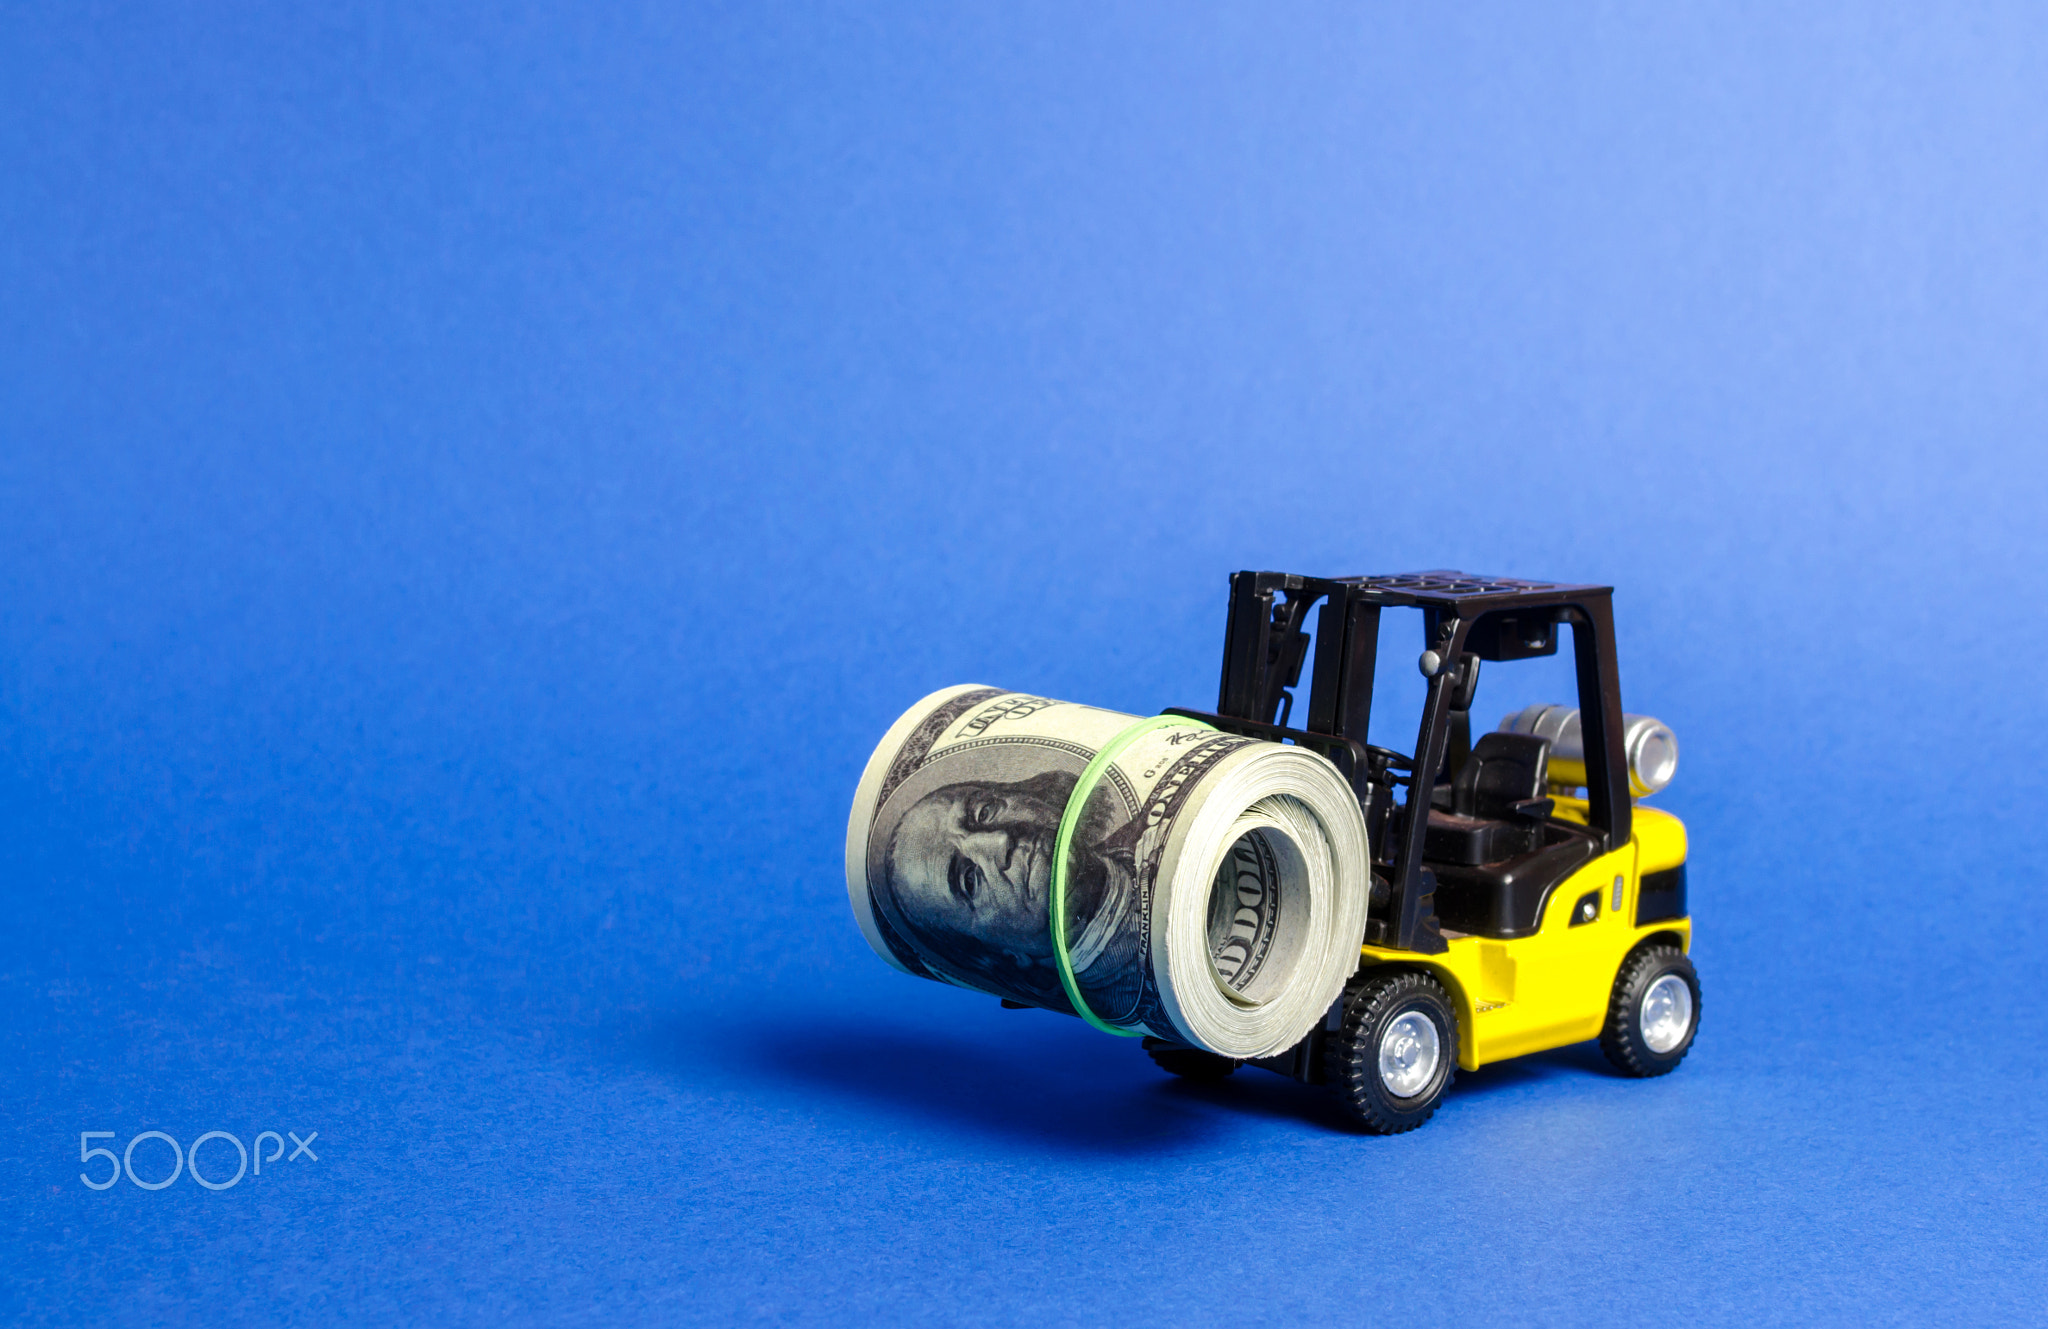 Forklift truck carries a bundle of dollars.